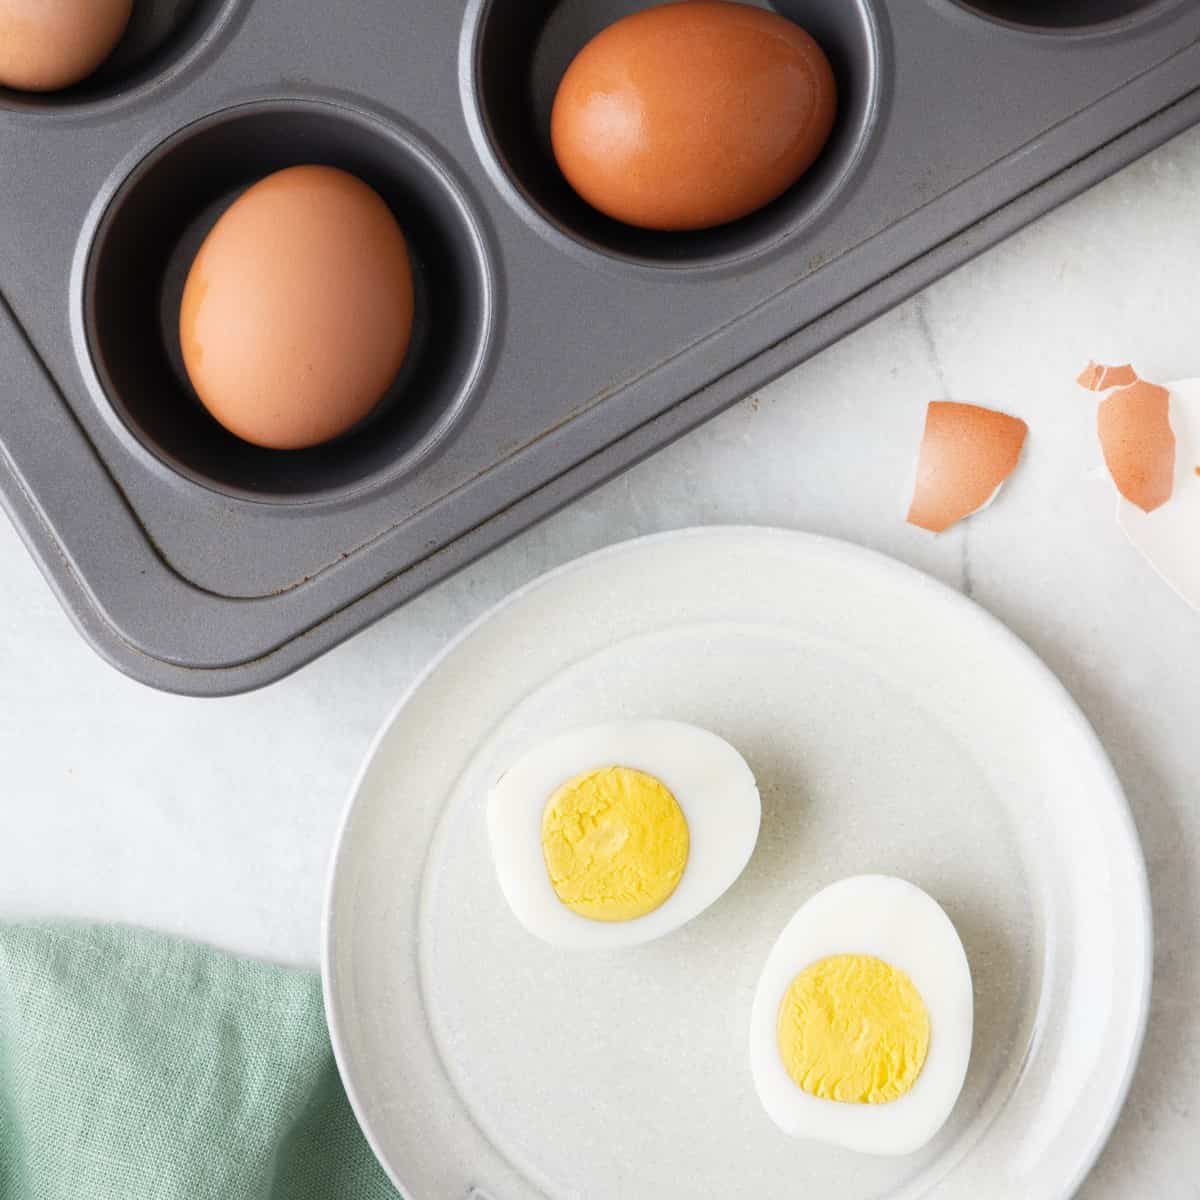 https://feelgoodfoodie.net/wp-content/uploads/2023/08/How-to-Make-Hard-Boiled-Eggs-in-Oven-TIMG.jpg